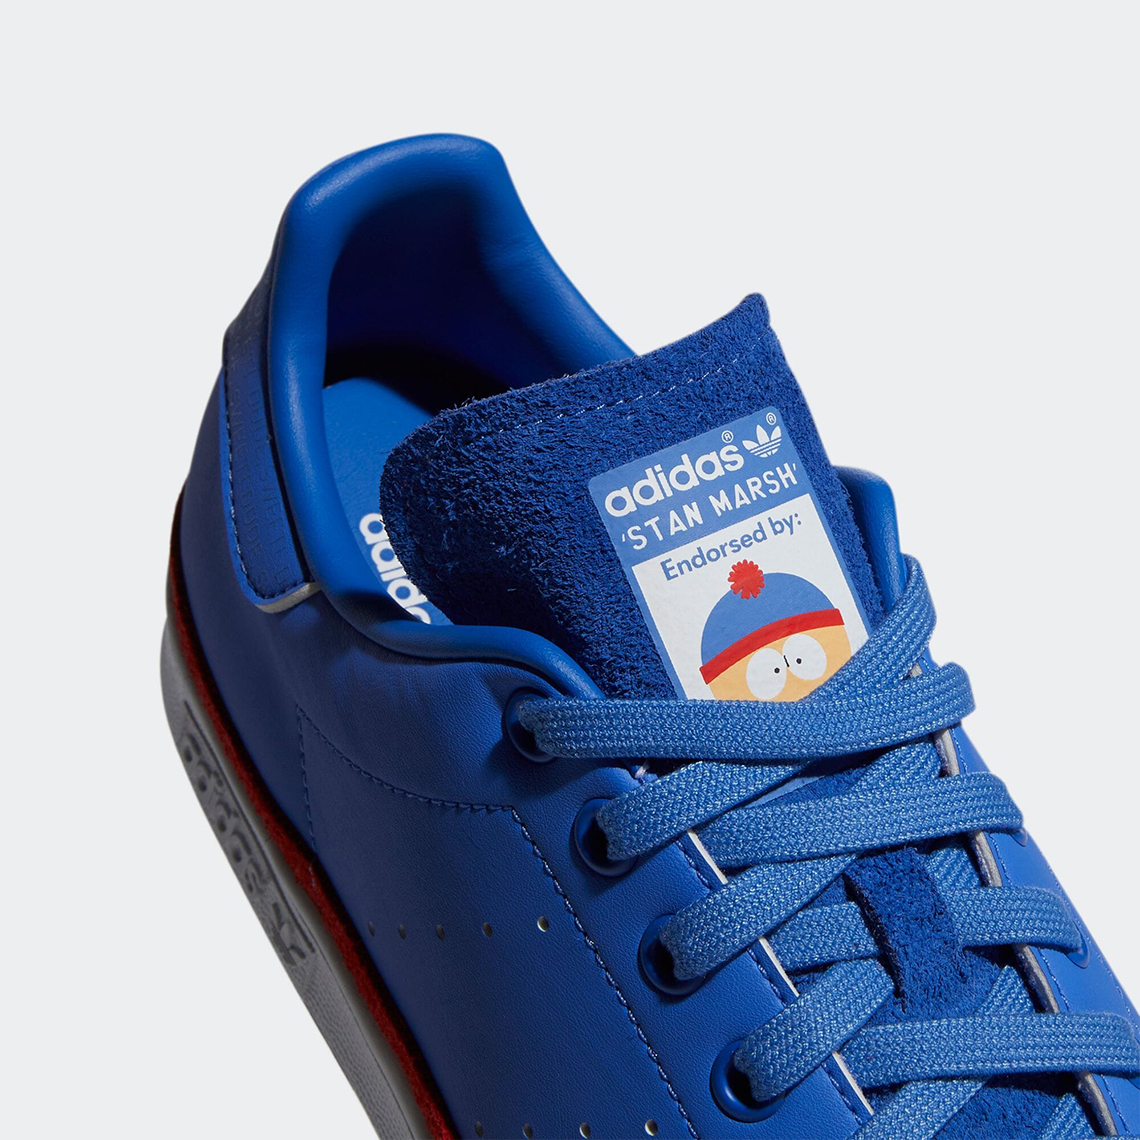 South Park over adidas Stan Smith Stan Marsh Gy6491 Release Date 5